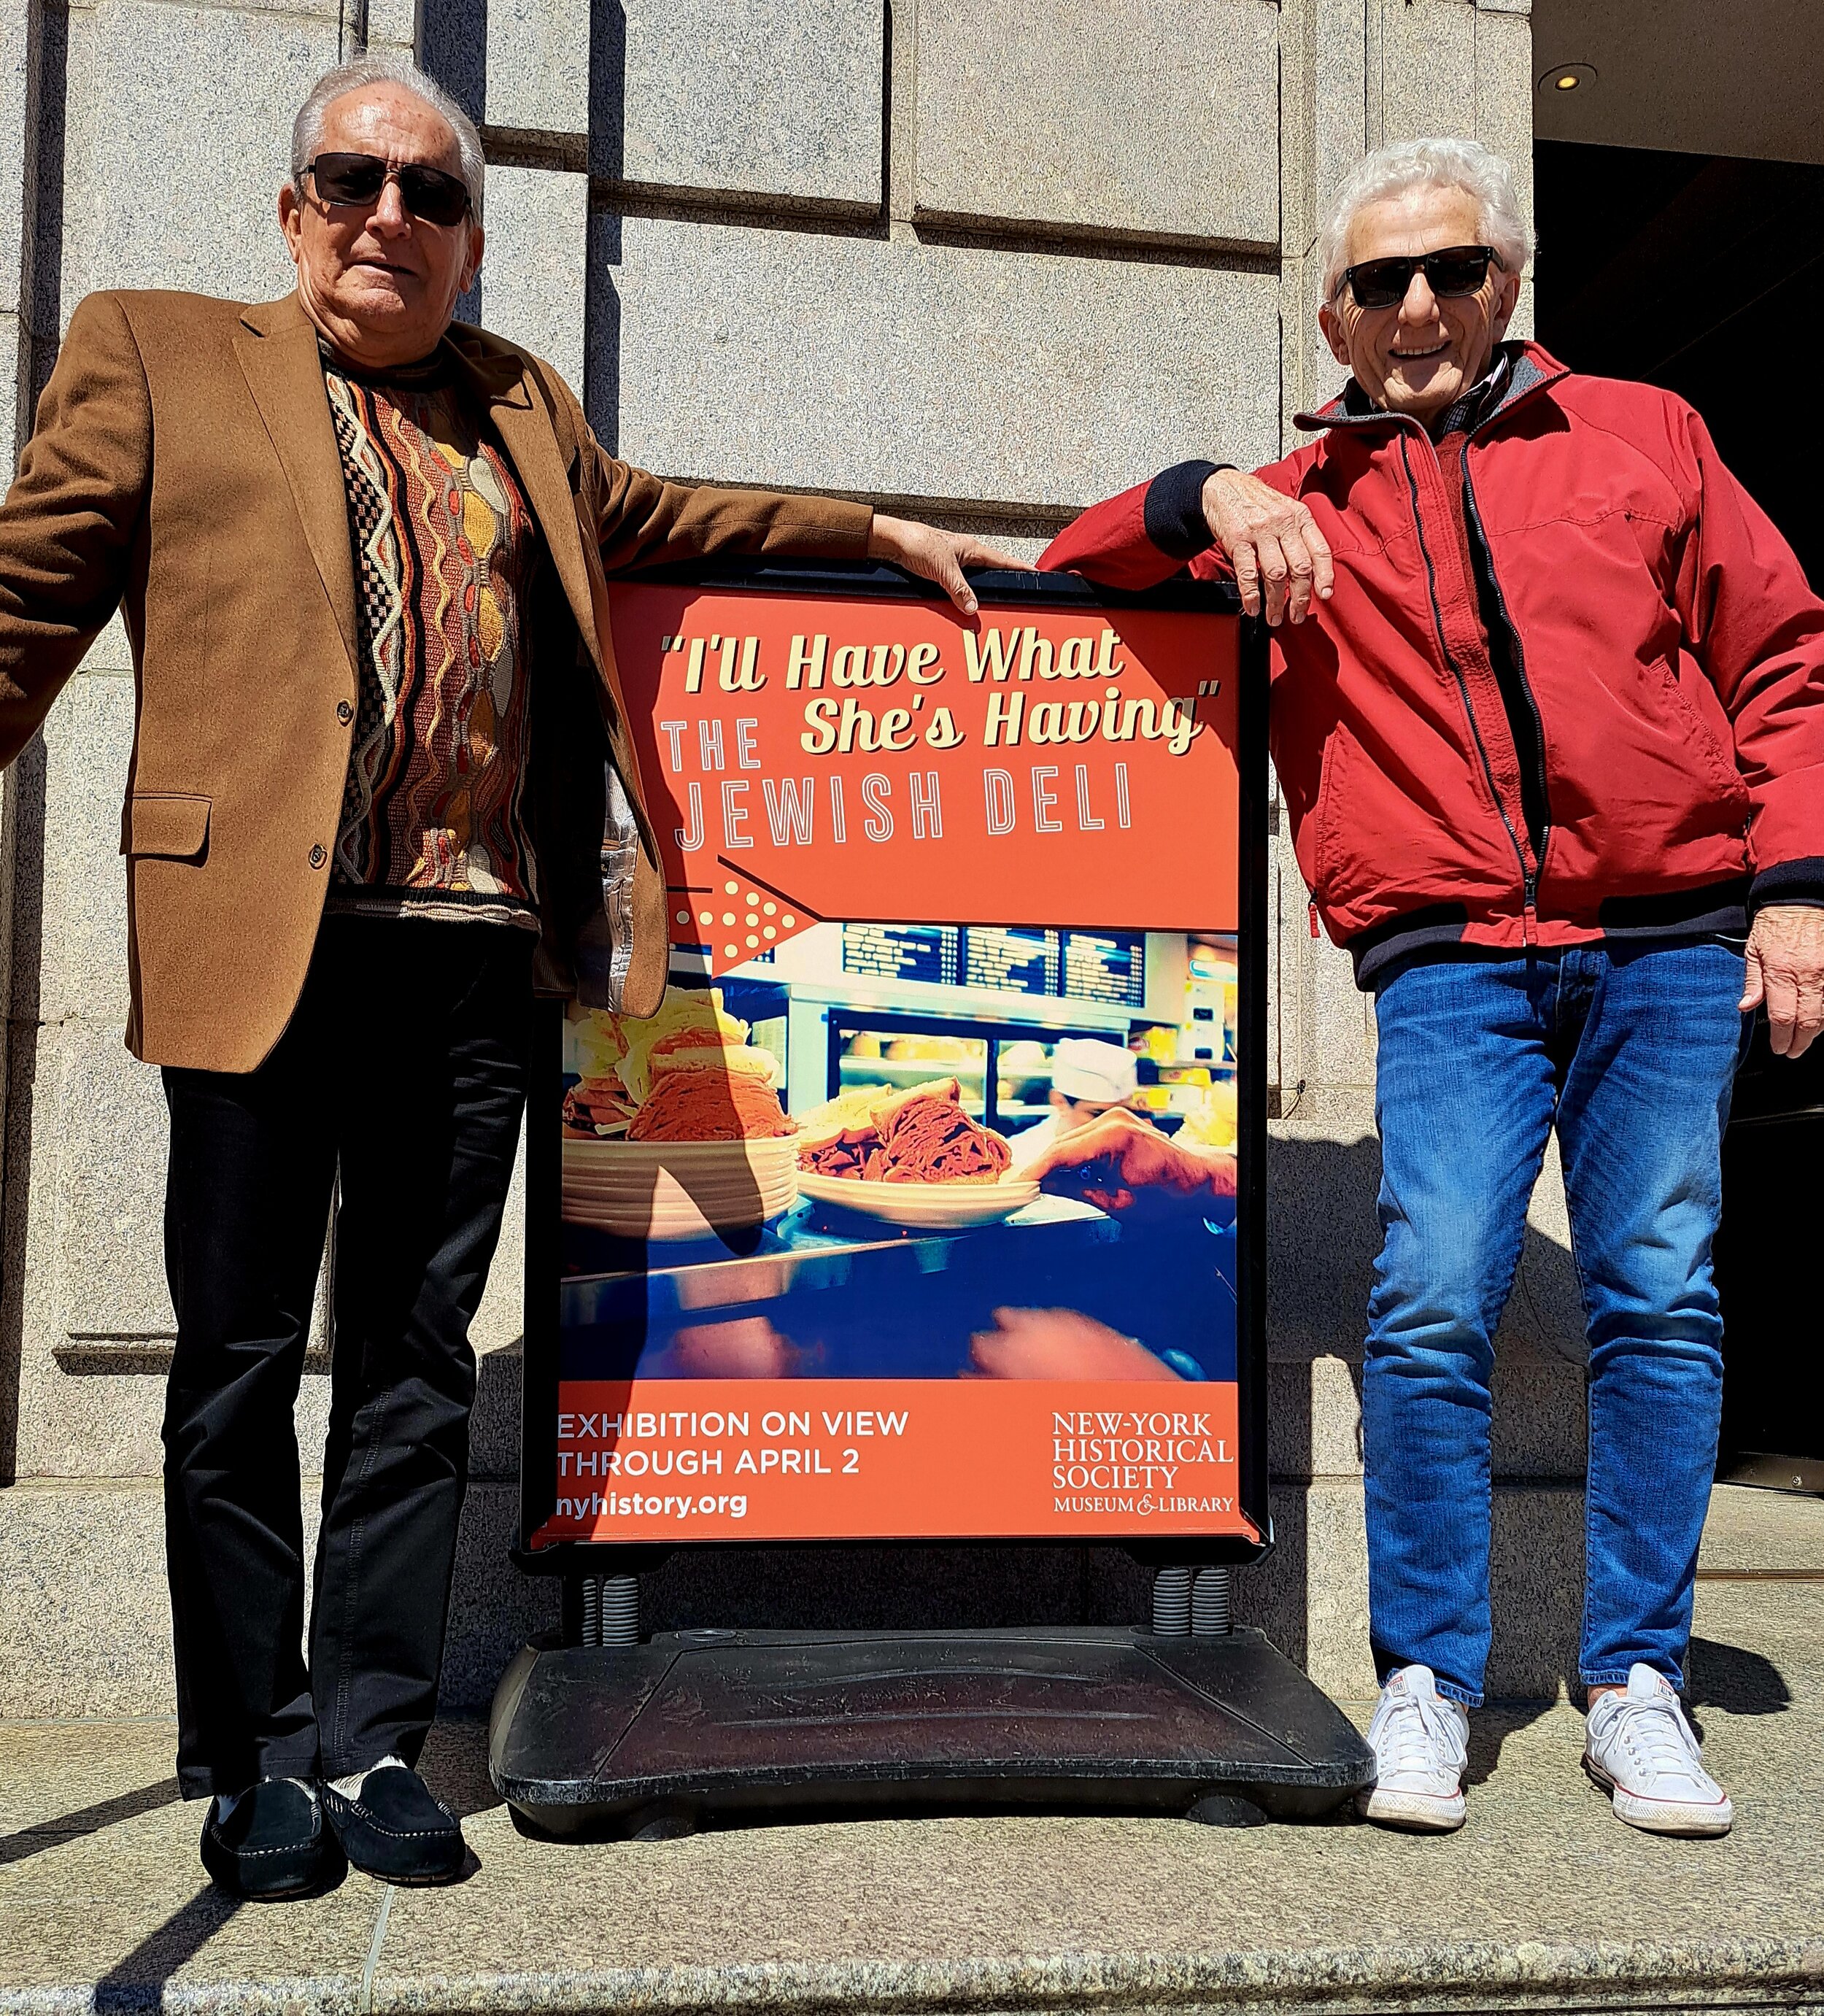  Glenn Parker (right) was Stu Schwartz’s counselor in 1959—64 years ago. They got together in March to take in an exhibit on Jewish Delis at the New York Historical Society. 